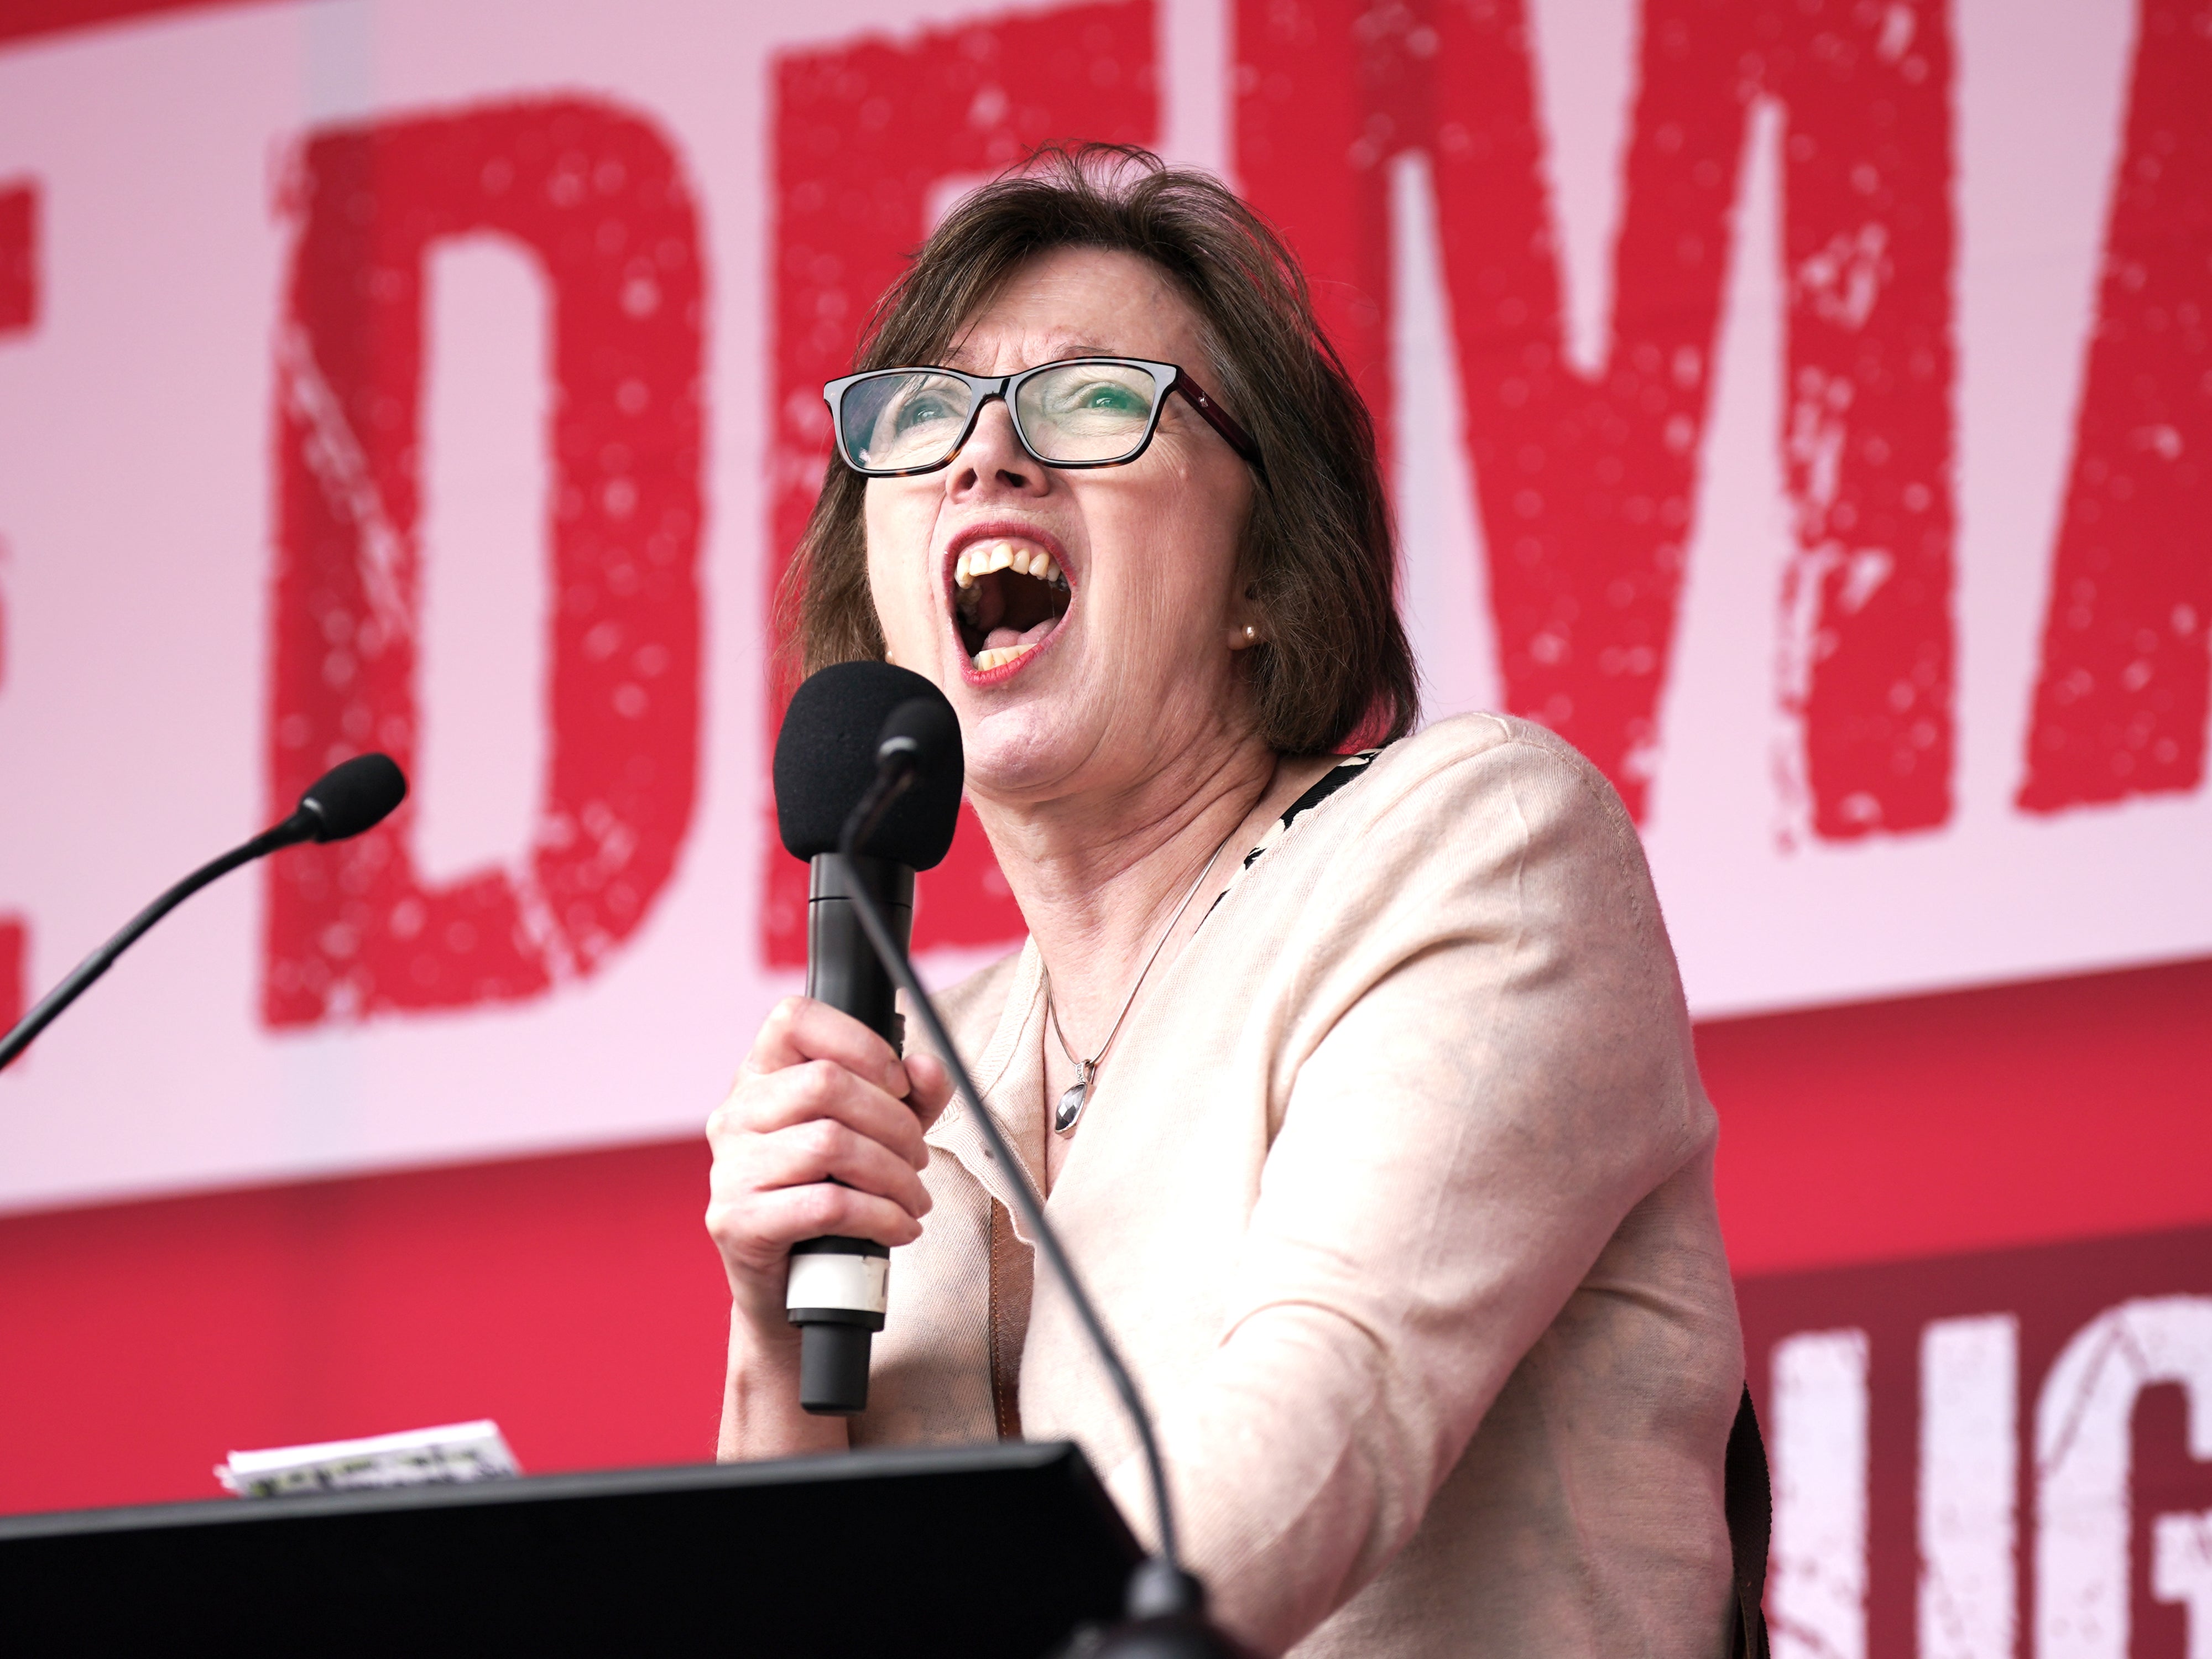 Frances O’Grady, General Secretary of the TUC, speaks during a TUC national demonstration in central London to demand action on the cost of living, a new deal for working people and a pay rise for all workers (Yui Mok/PA Images)